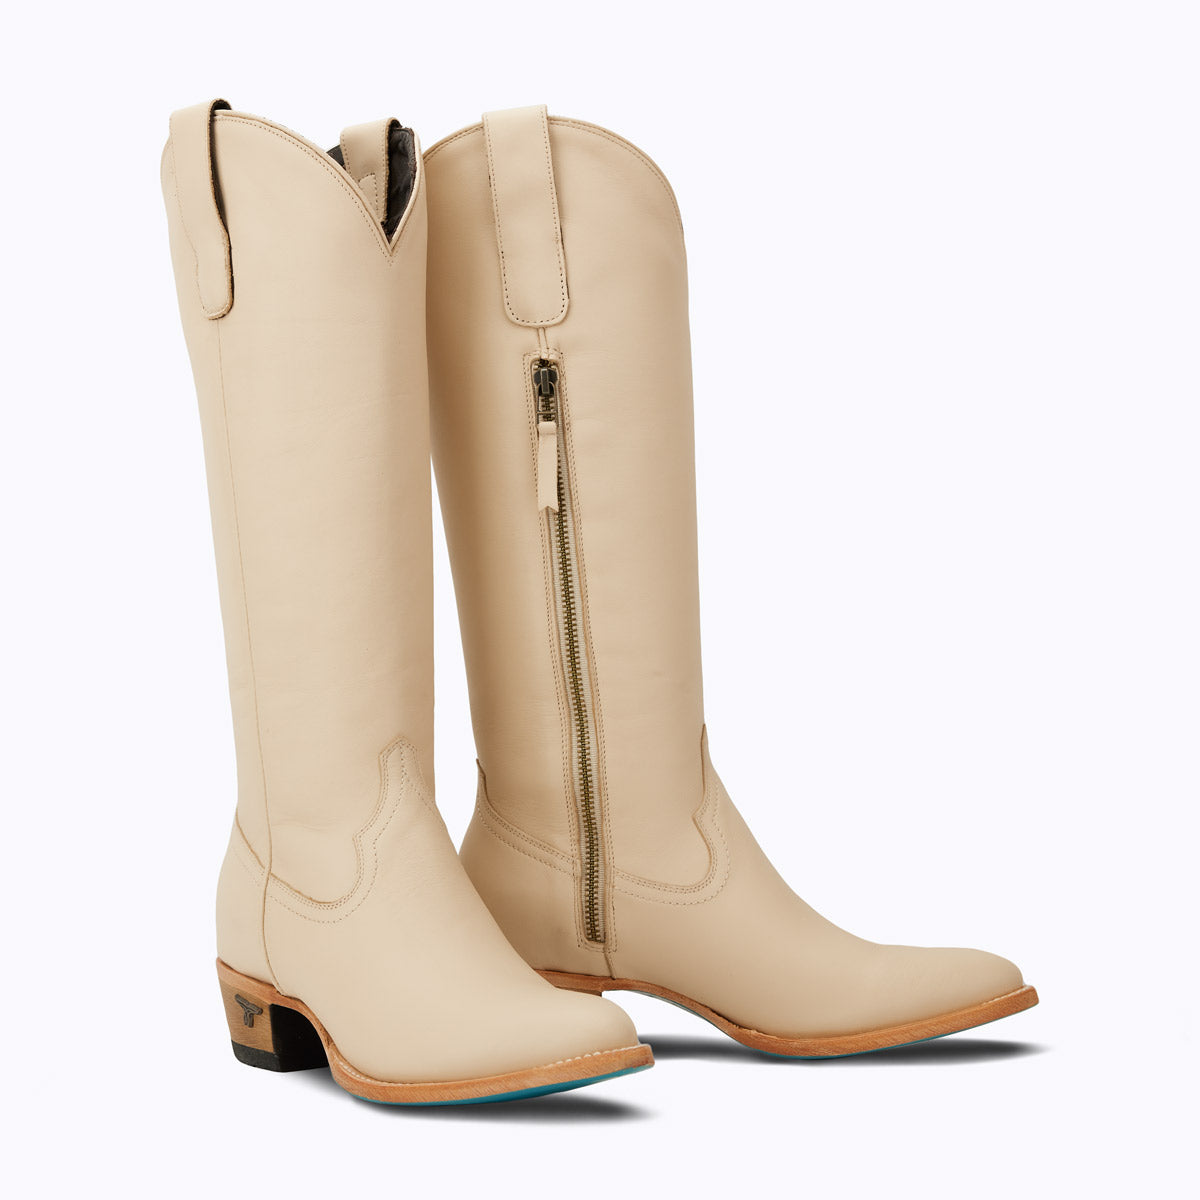 Lane PLAIN JANE BOOTS in PALE IVORY